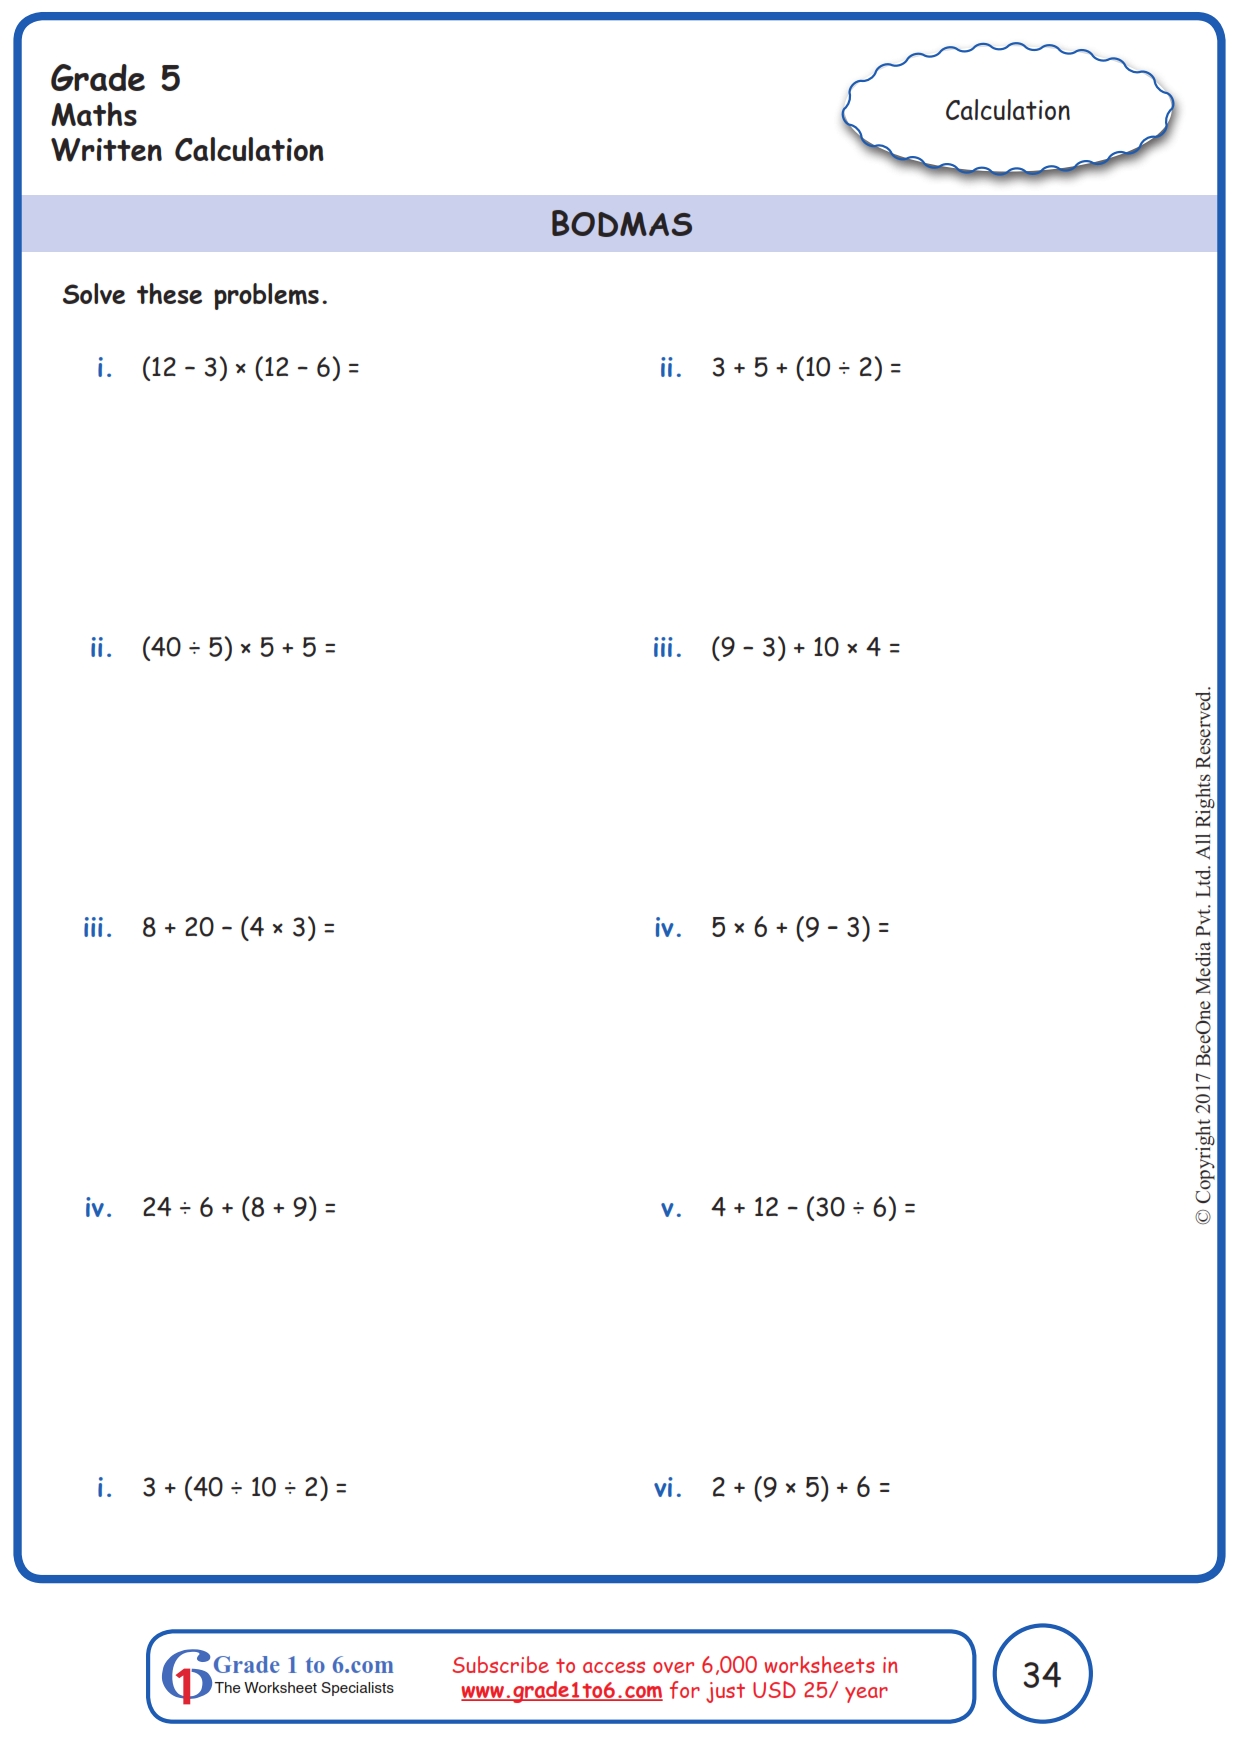 order of operations bodmas worksheets www grade1to6 com